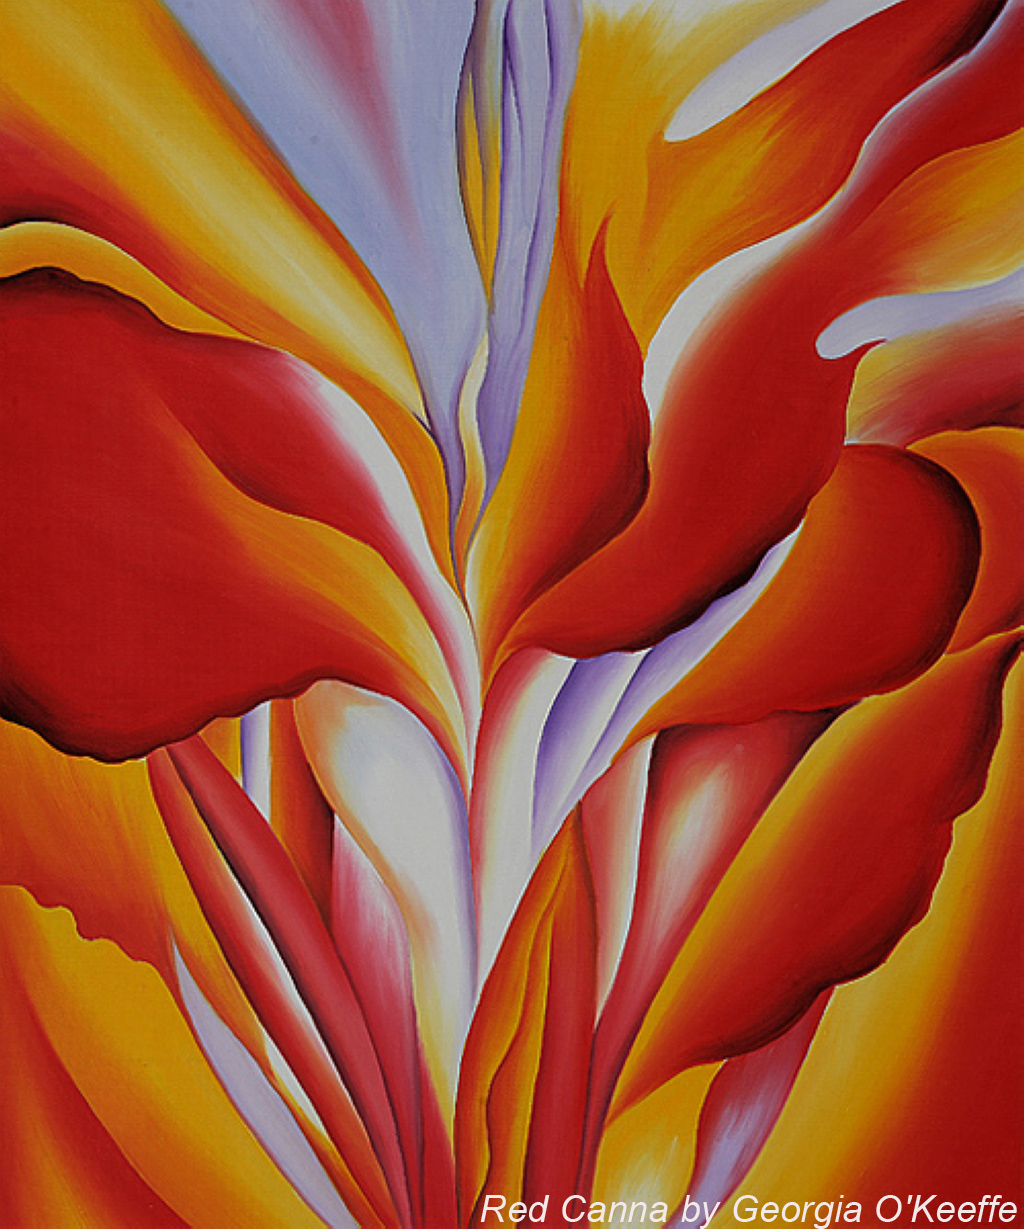 Image of an artwork entitled Red Canna by George O'Keeffe